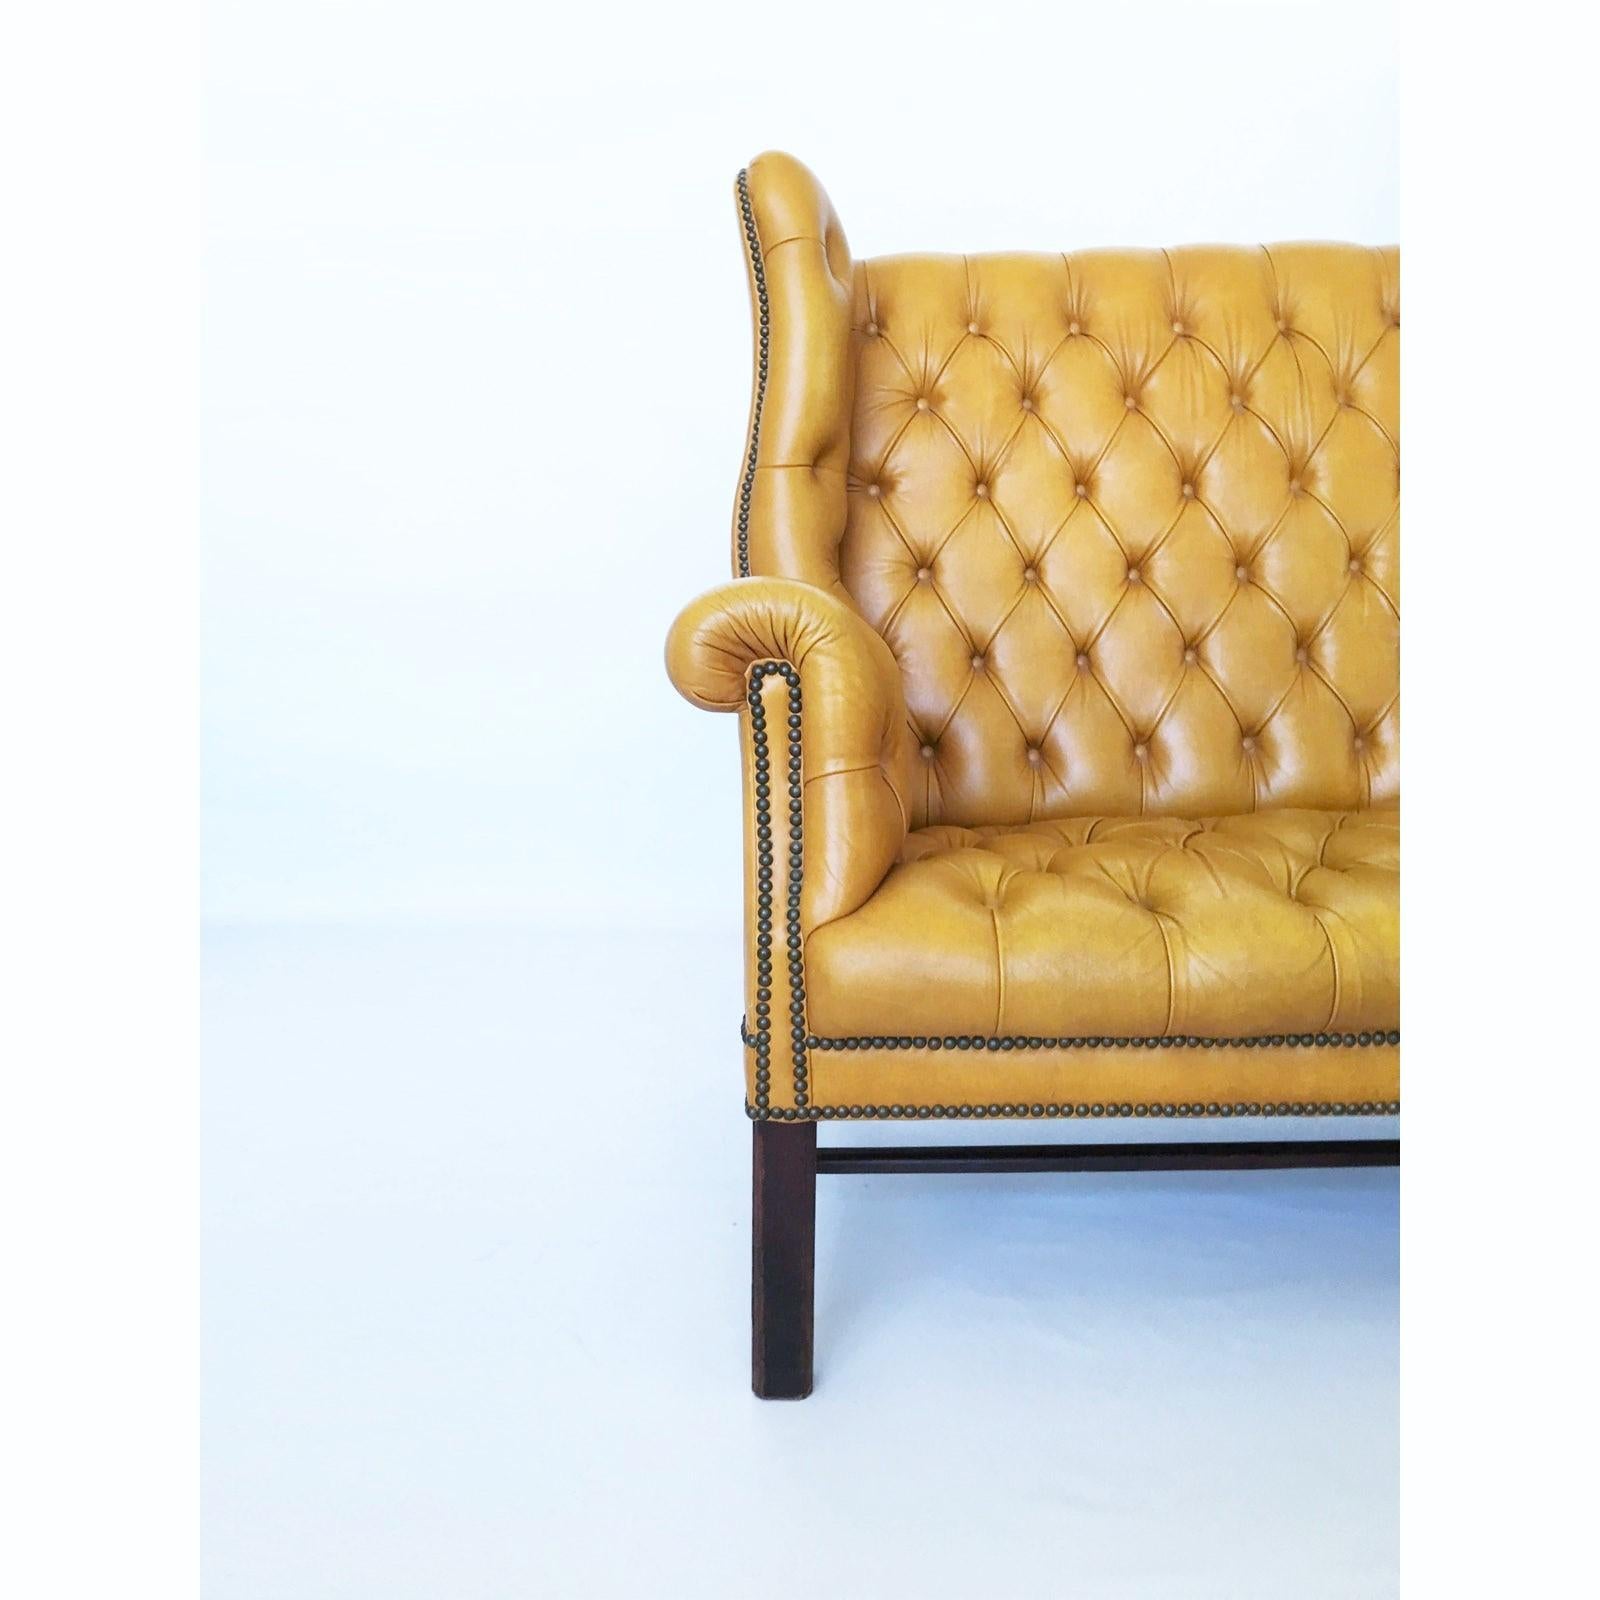 This handsome George III style wing back tufted leather settee is the definition of old fashioned luxury. Featuring a warm mustard leather tufting with out-scrolled wings & arms all resting on square Marlboro front legs & splayed back legs that are